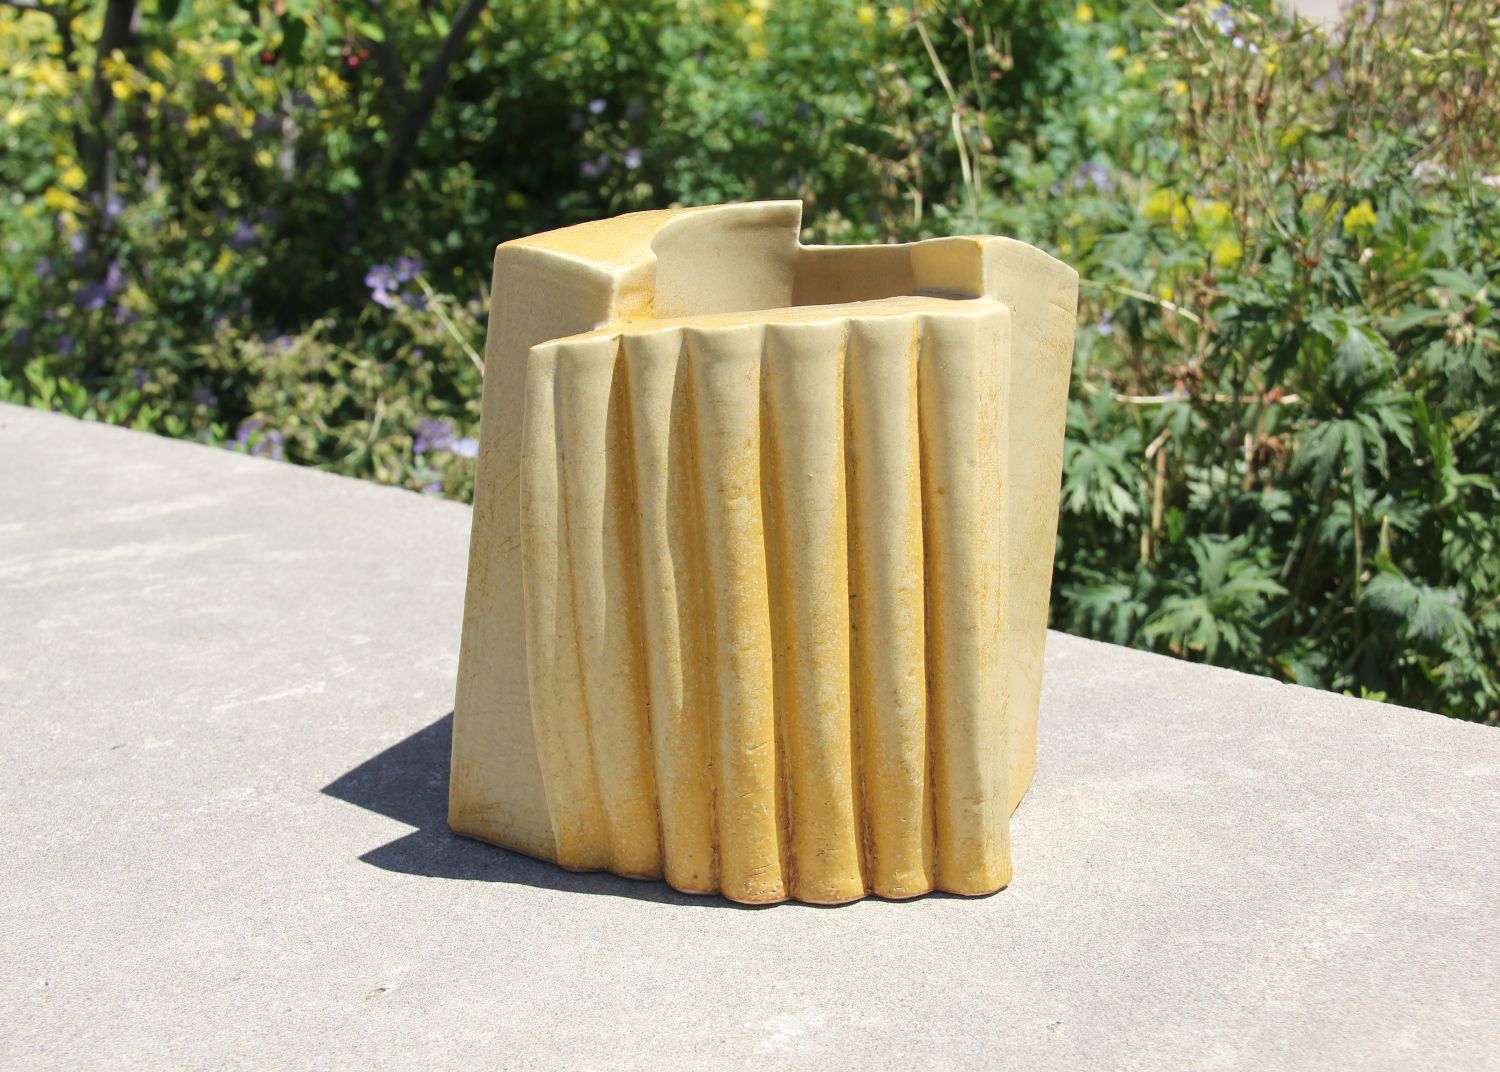 Bruce Cochrane: Sculptural Vase in Yellow Product Image 1 of 5